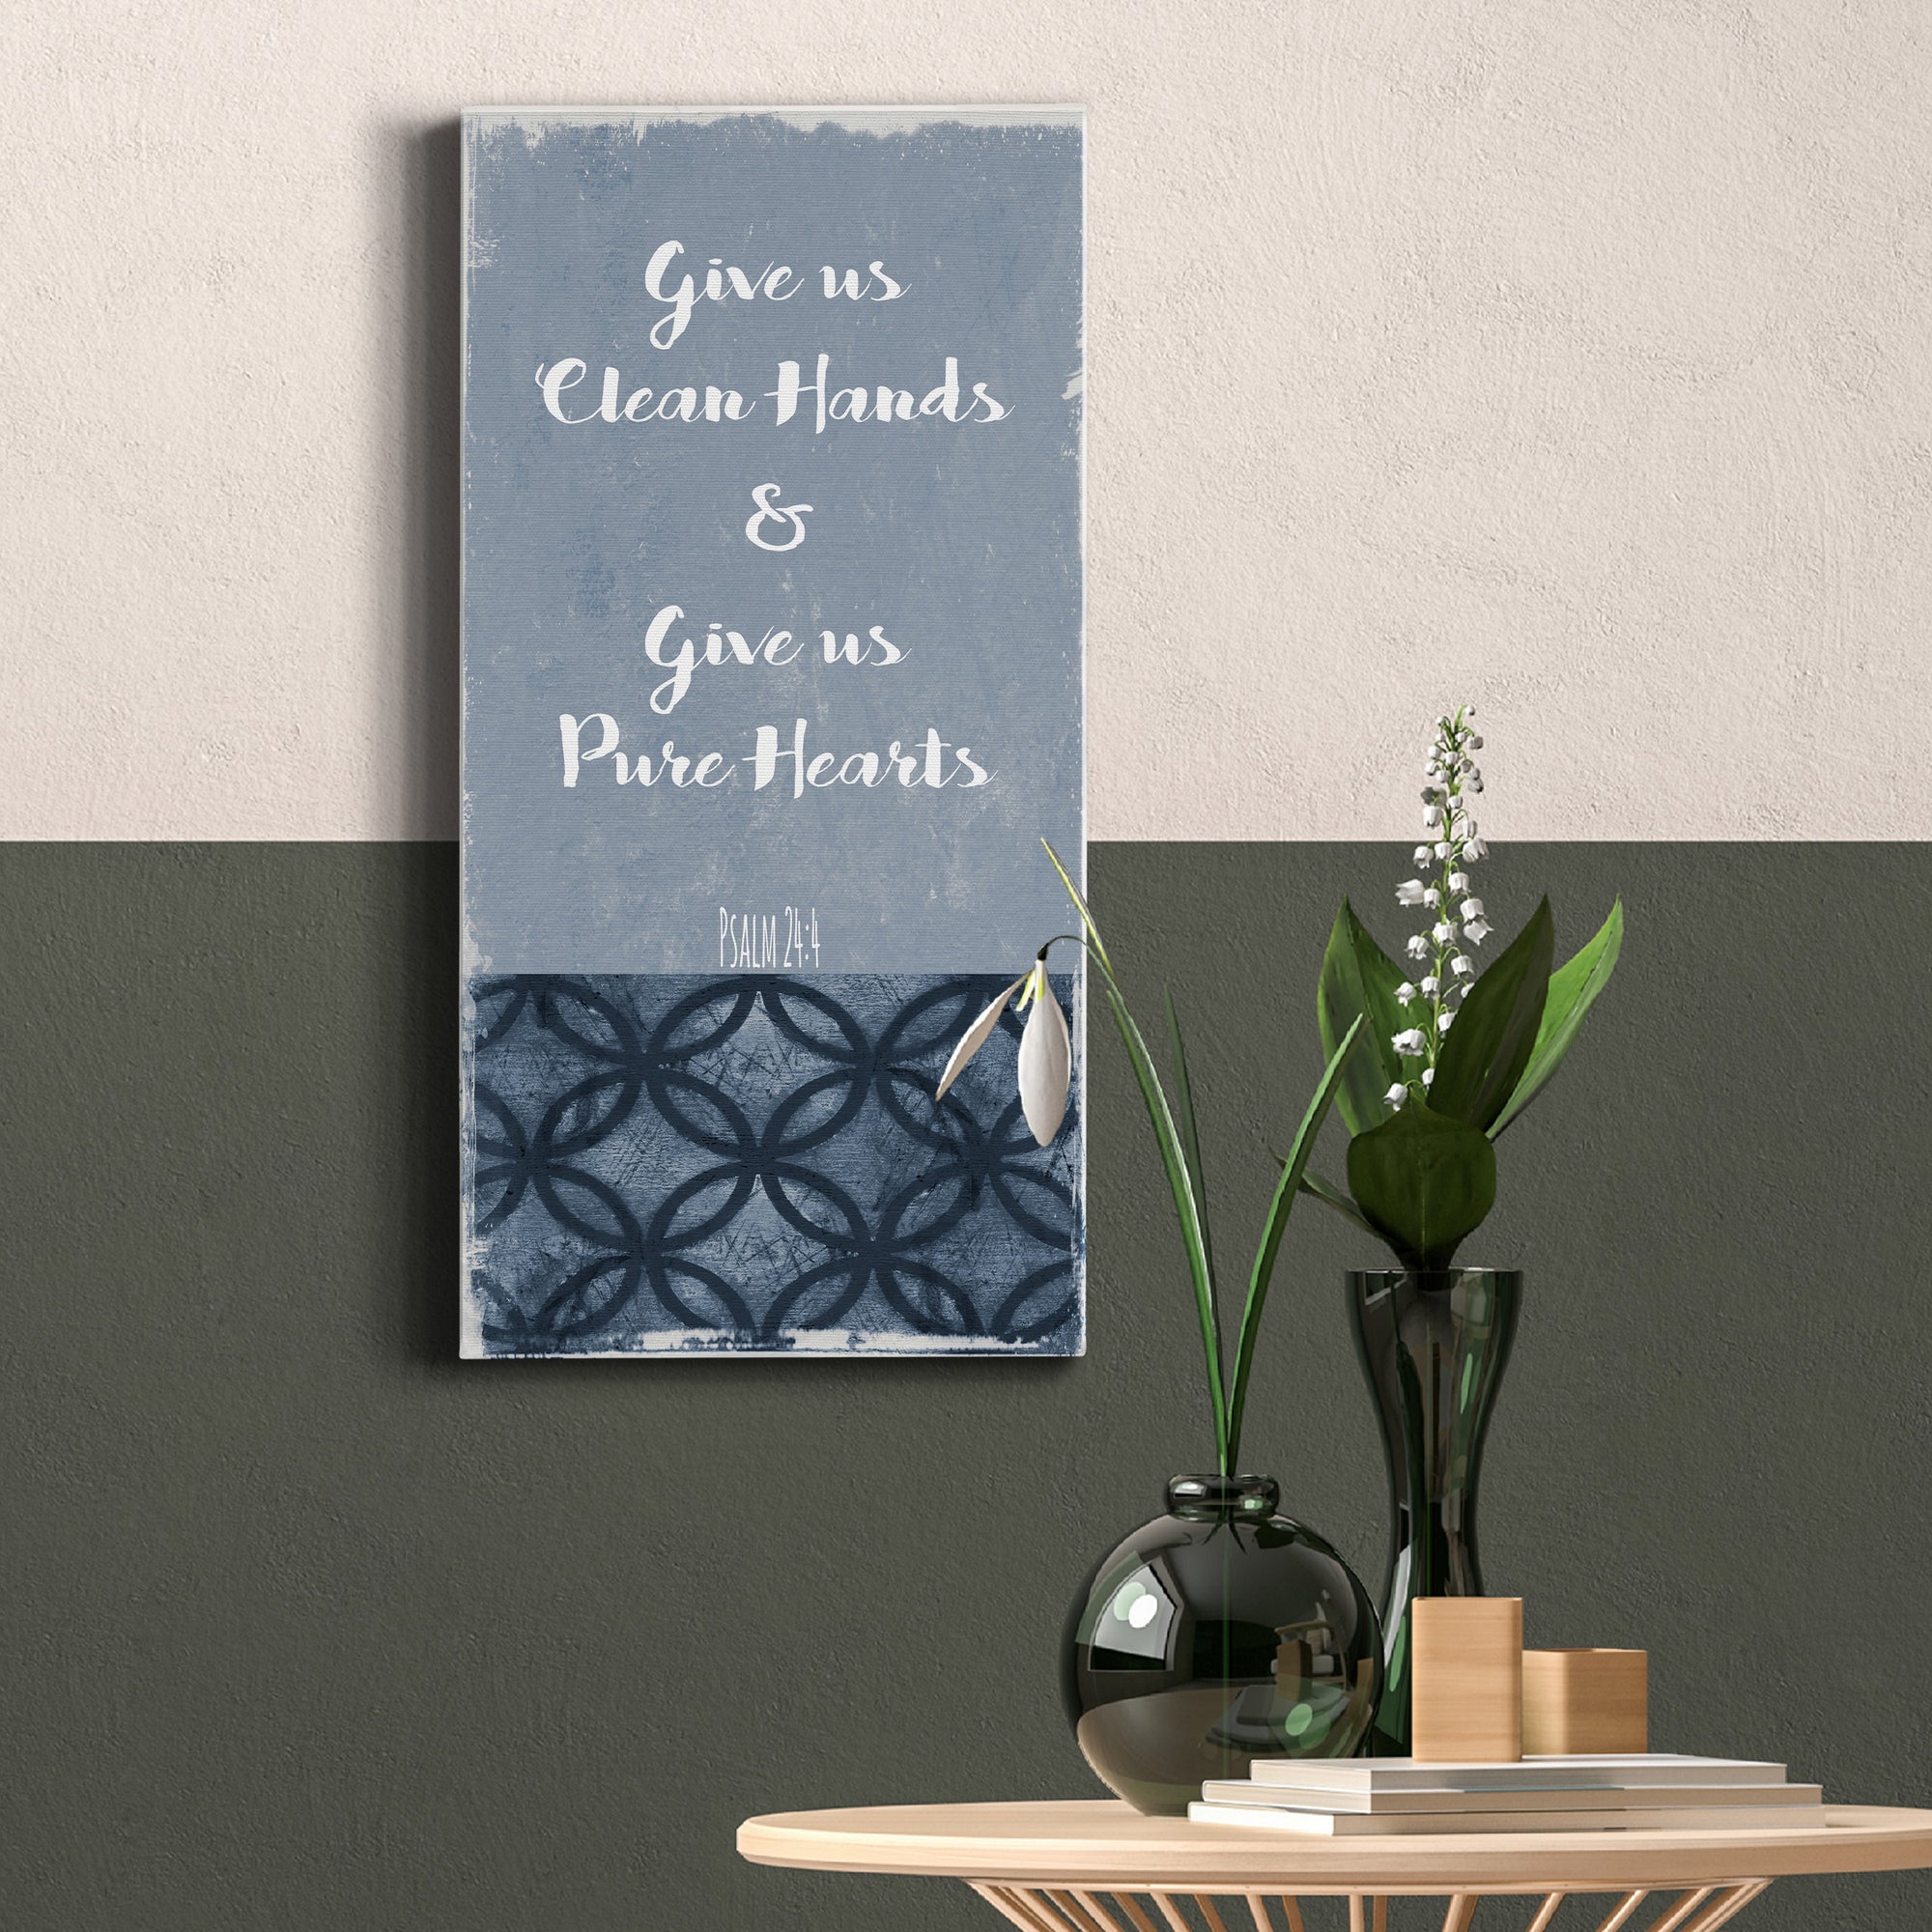 Give us Clean Hands - Premium Gallery Wrapped Canvas - Ready to Hang